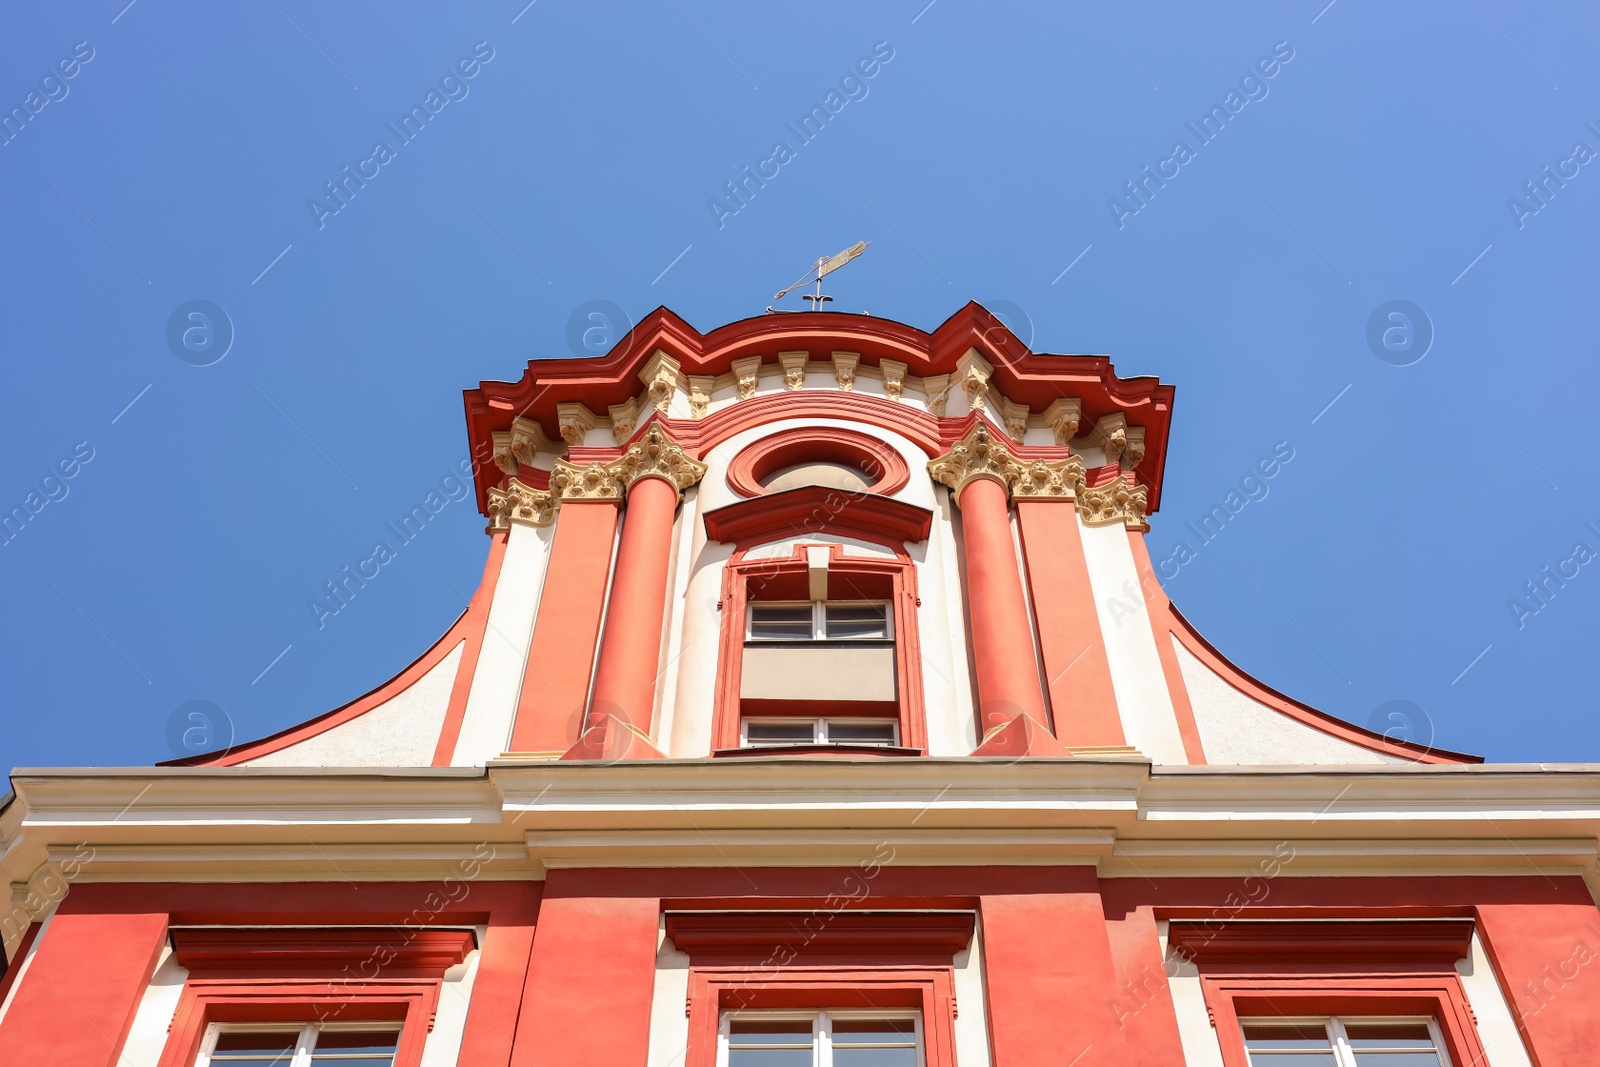 Photo of Beautiful building with weather vane on roof against blue sky, low angle view